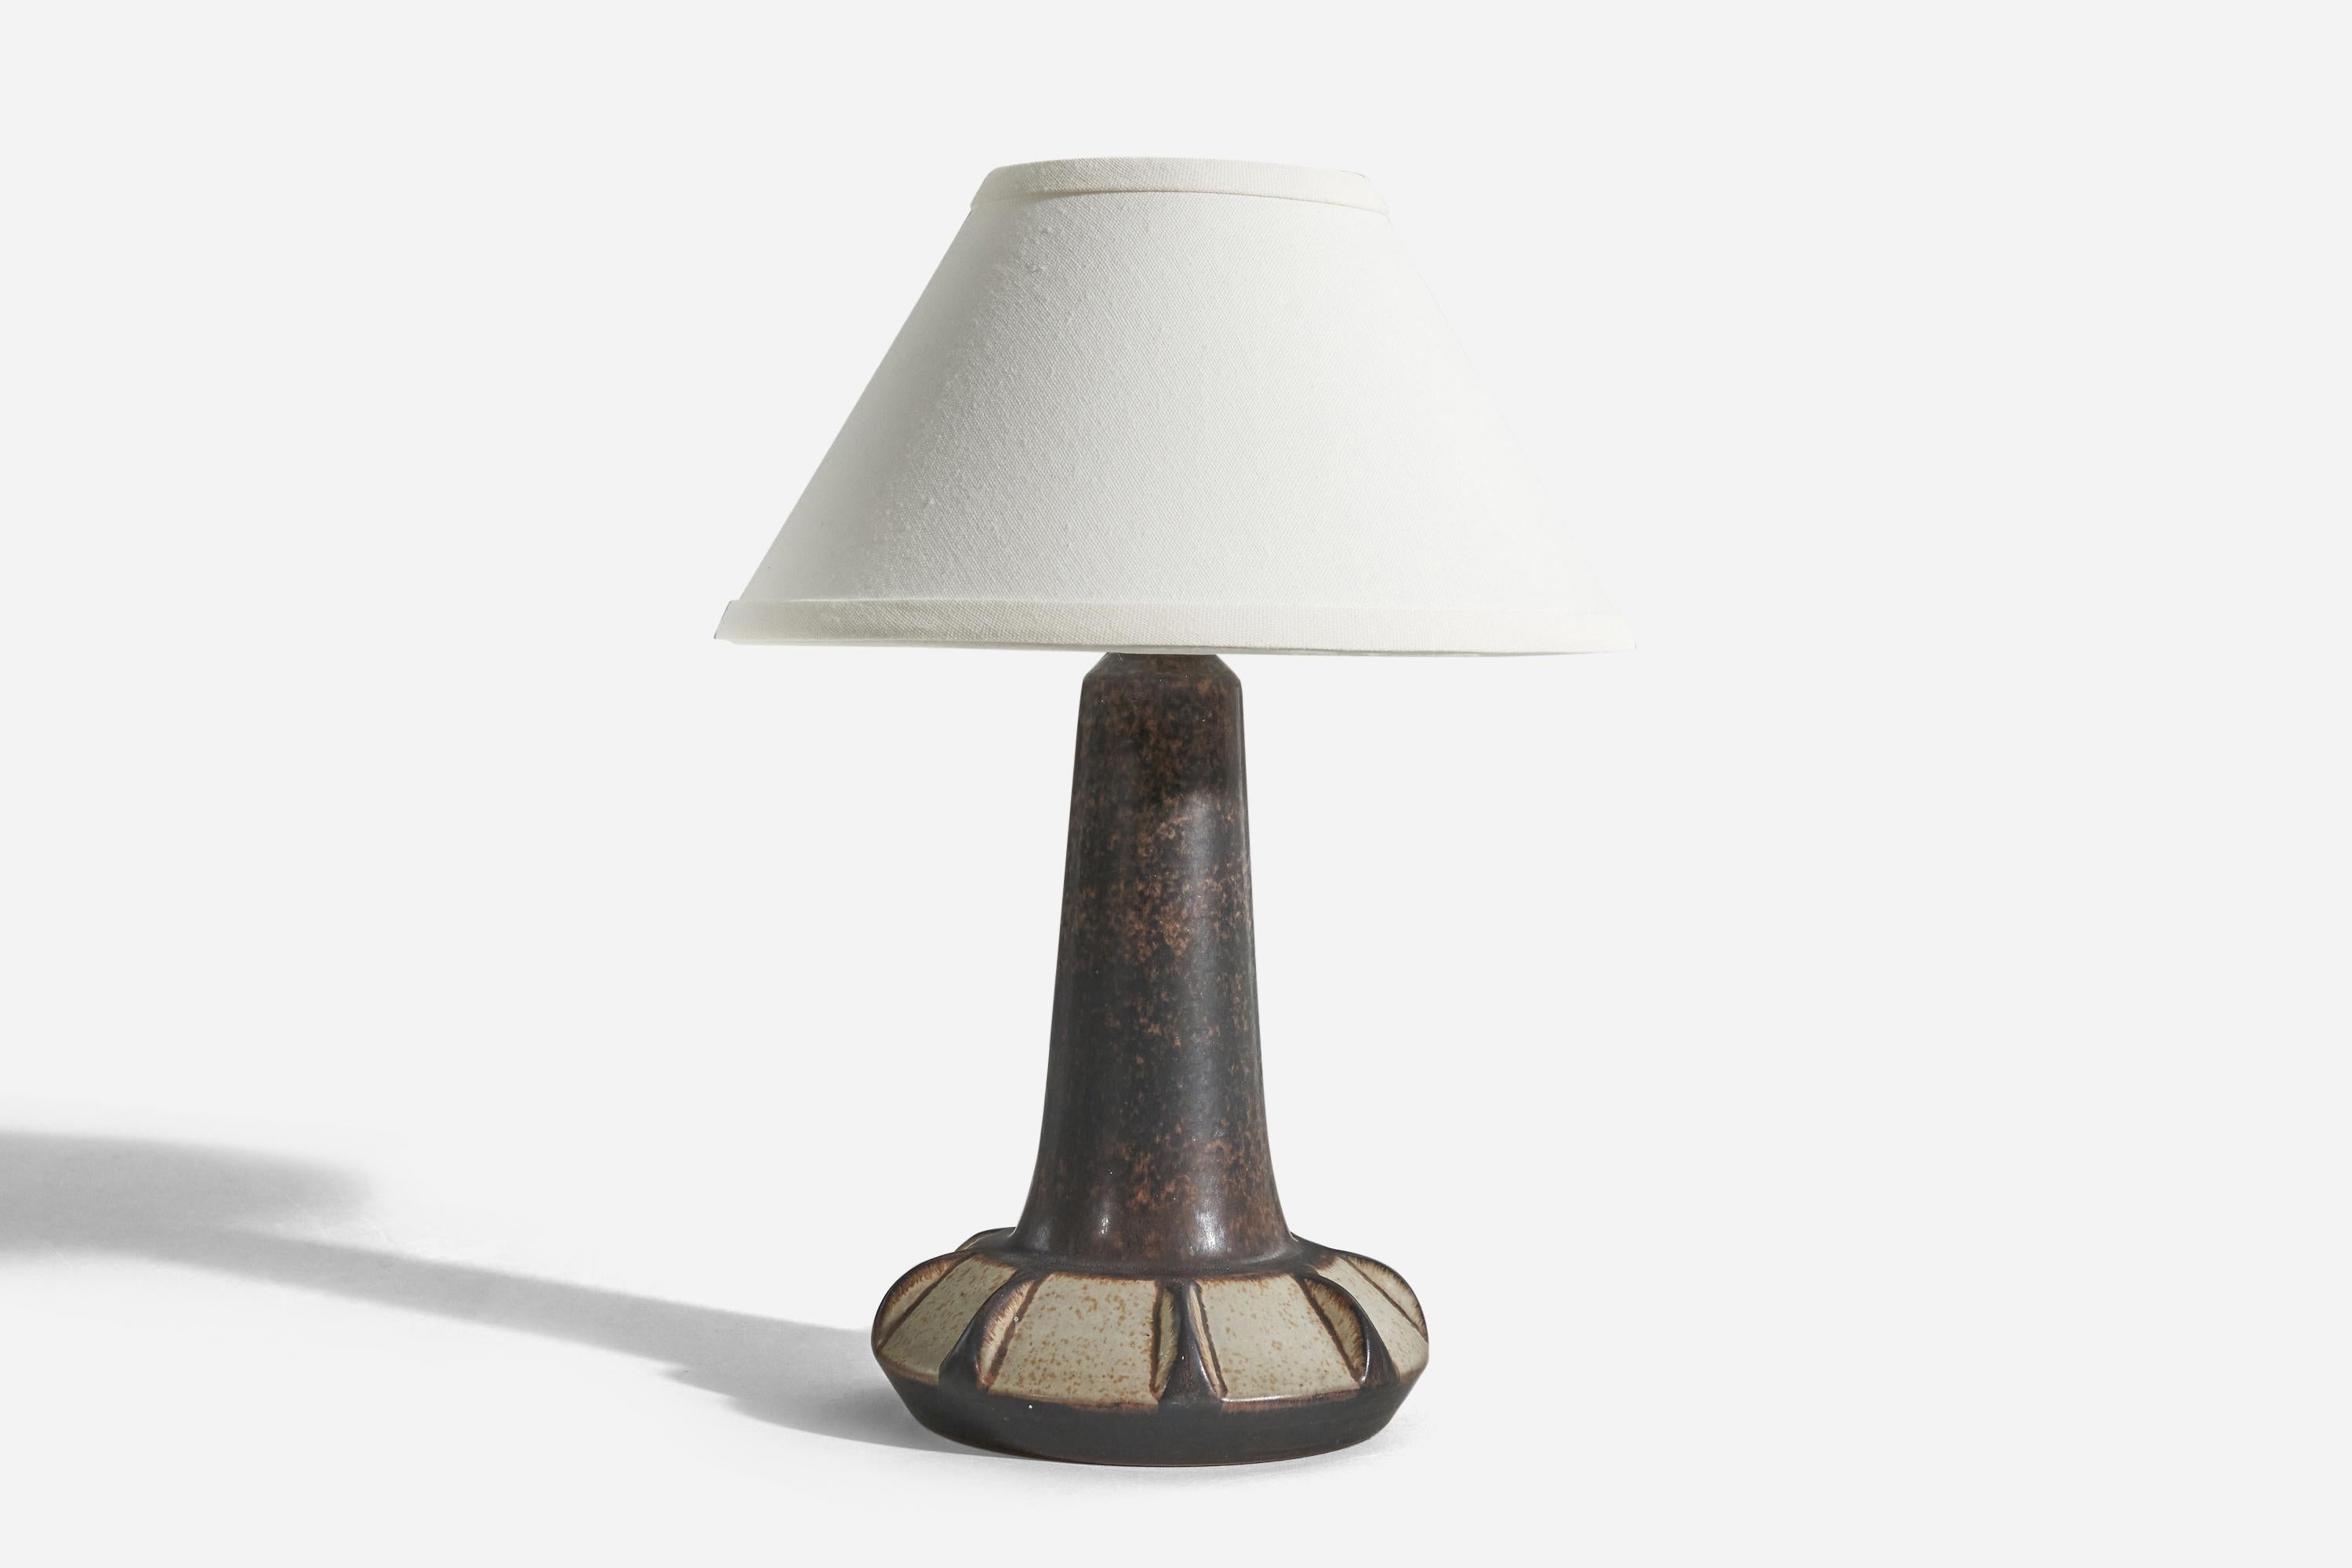 A brown, glazed stoneware table lamp designed and produced by Michael Andersen Keramik, Denmark, 1960s.

Sold without lampshade. 
Dimensions of Lamp (inches) : 11.25 x 6.25 x 6.25 (H x W x D)
Dimensions of Shade (inches) : 4.25 x 10.25 x 6 (T x